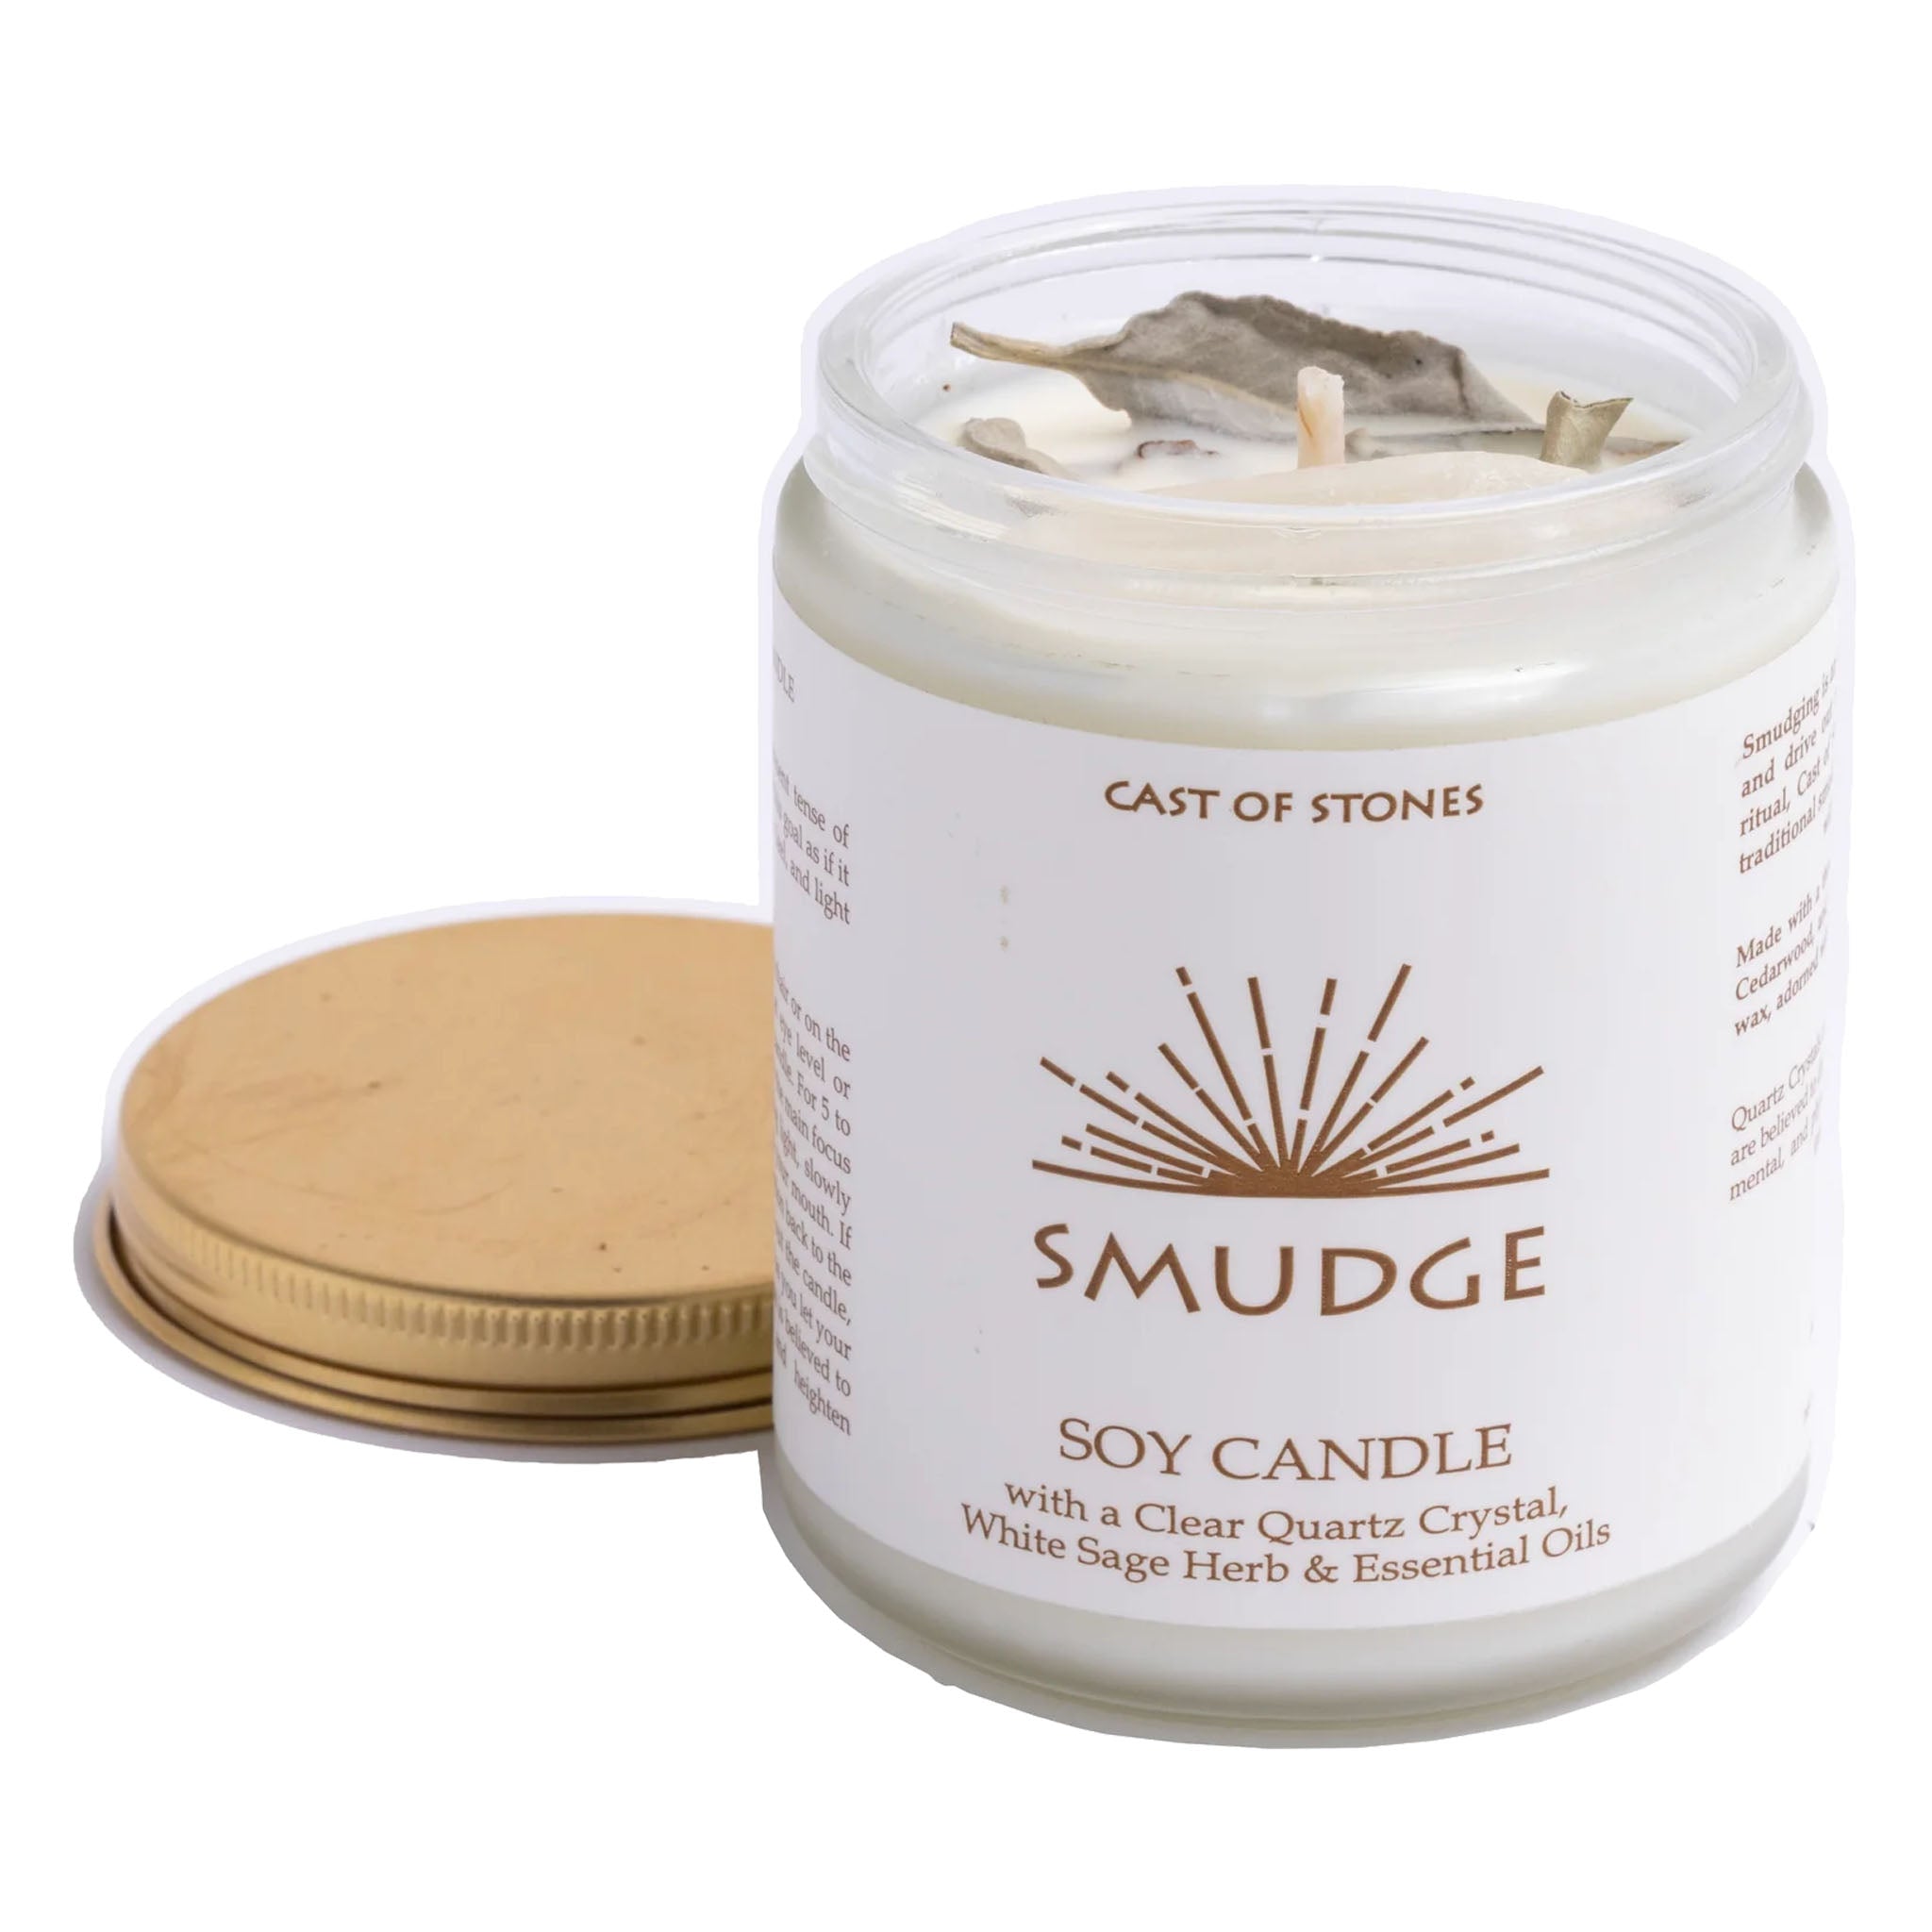 Smudge Candle with Clear Quartz Crystal, White Sage Herb, and Essential Oils